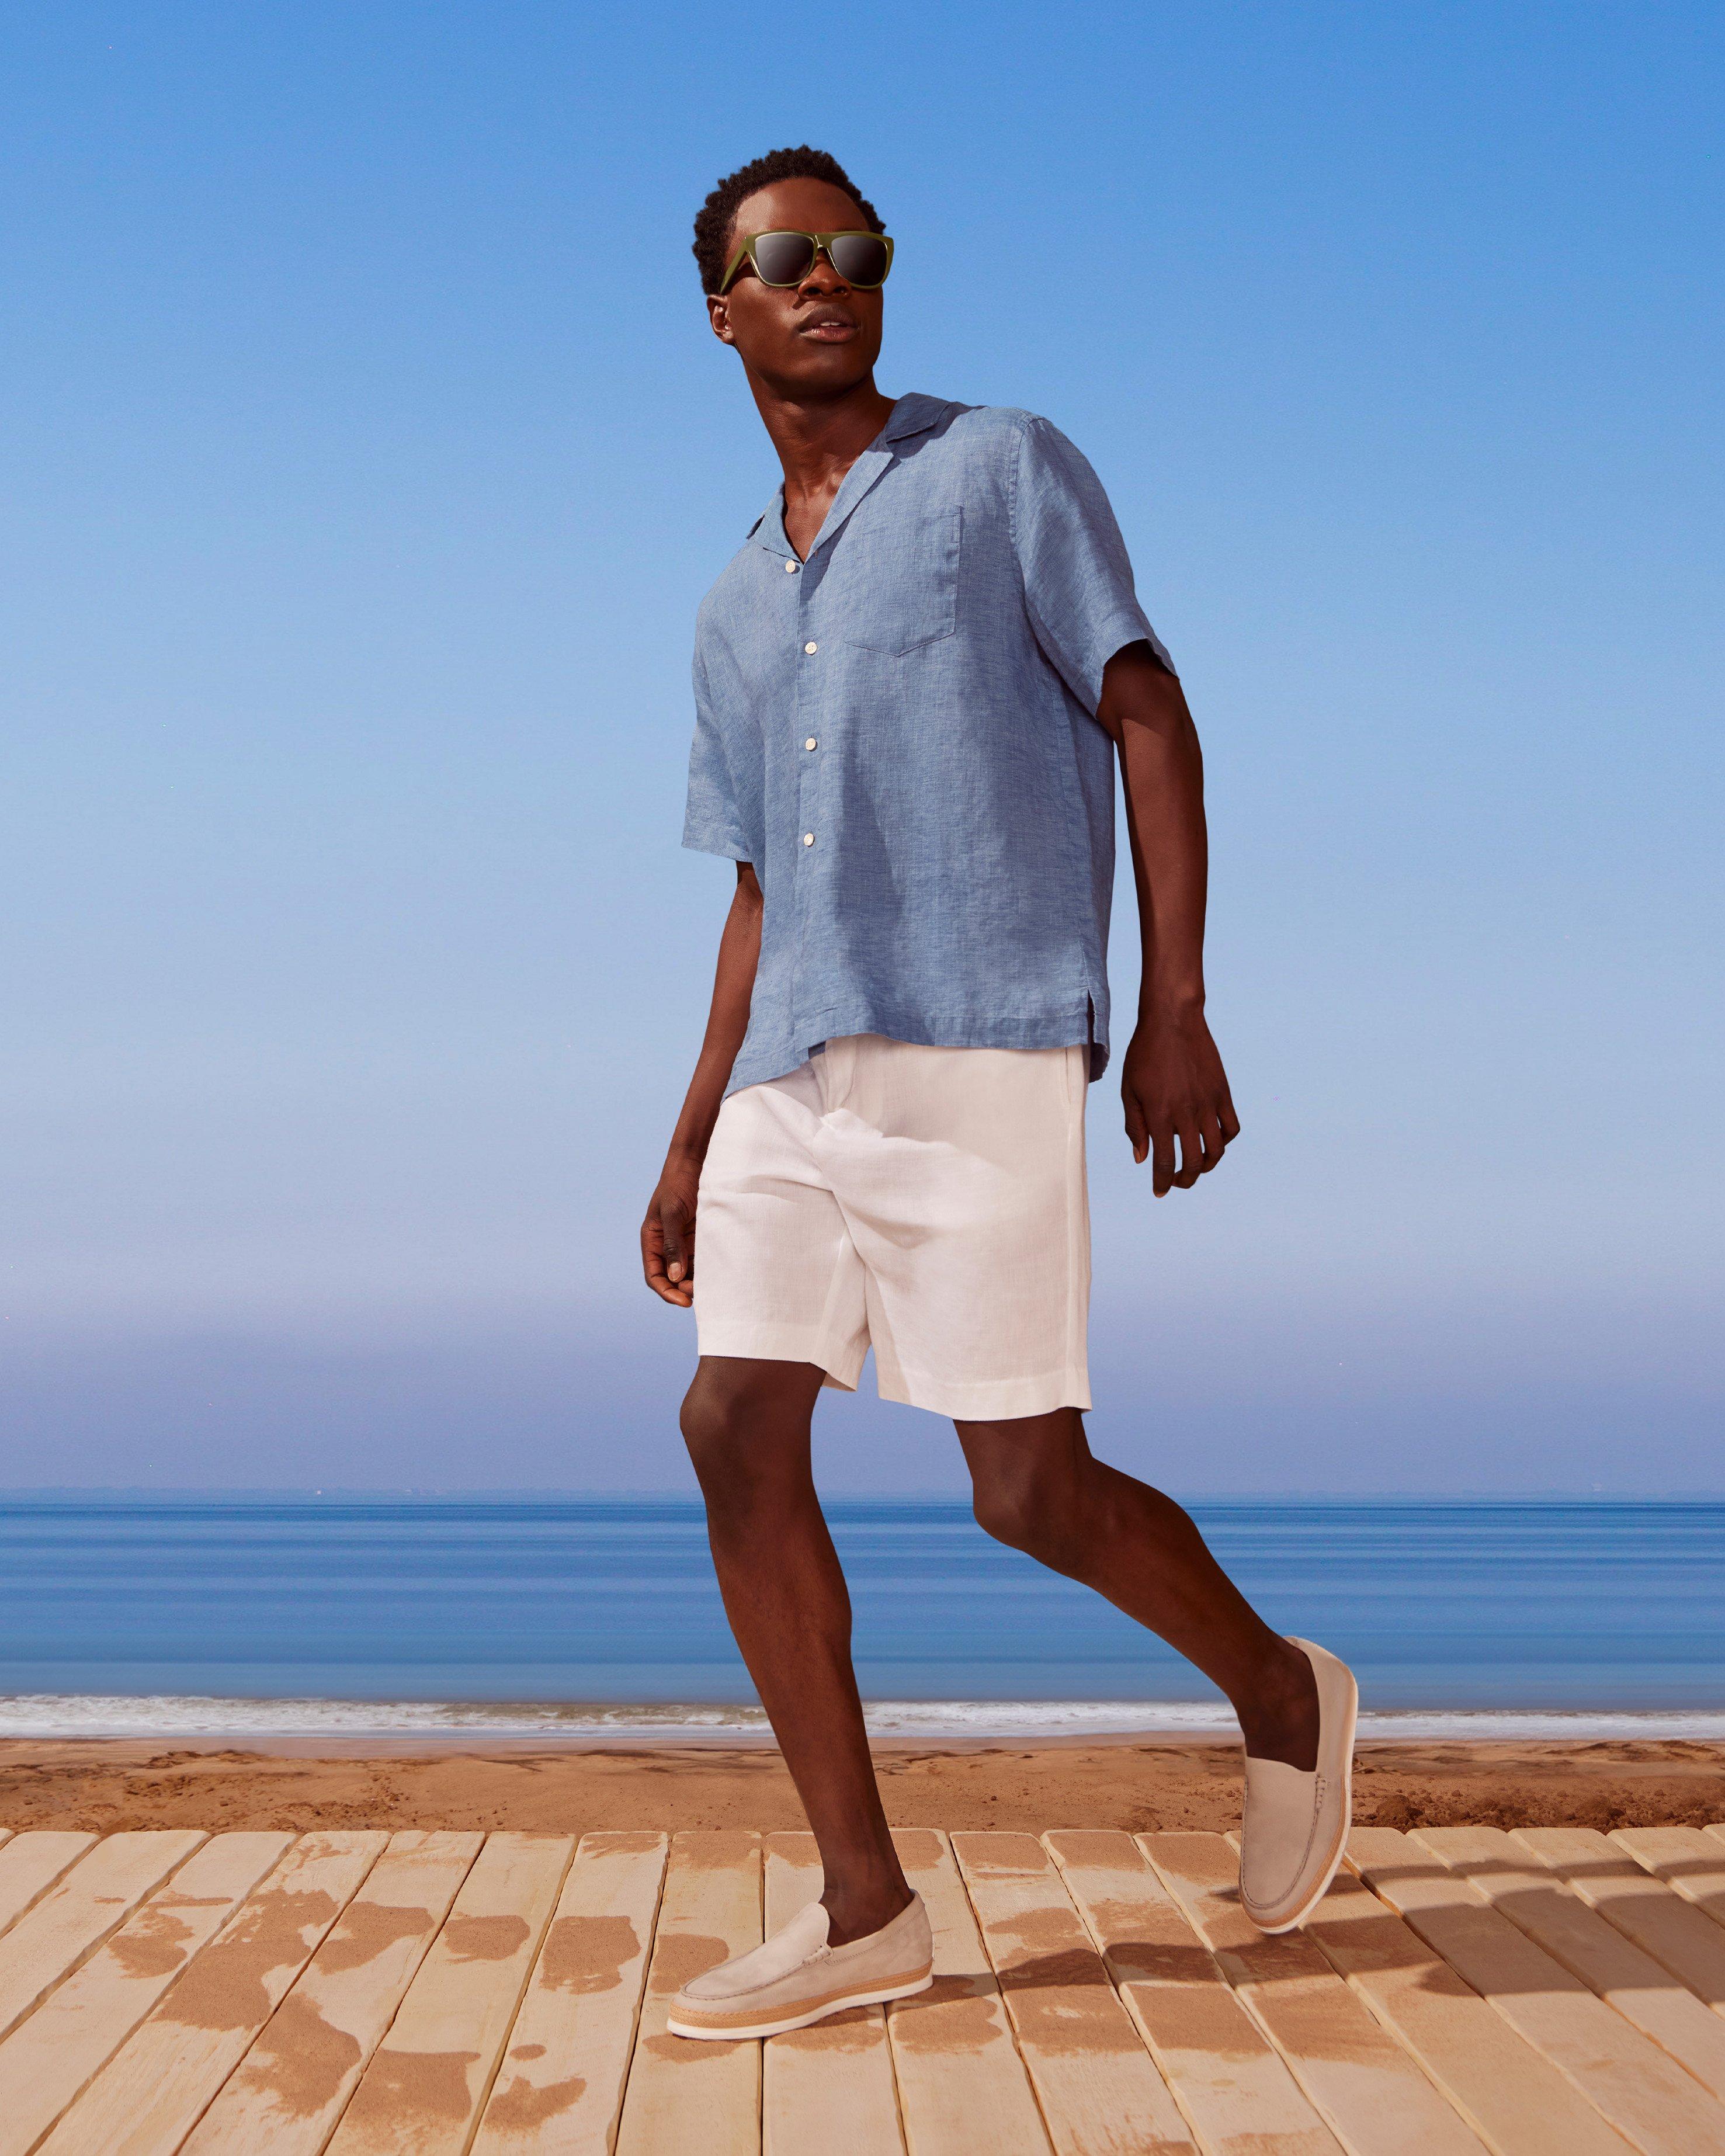 A man in a blue shirt and white shorts walking on a beach